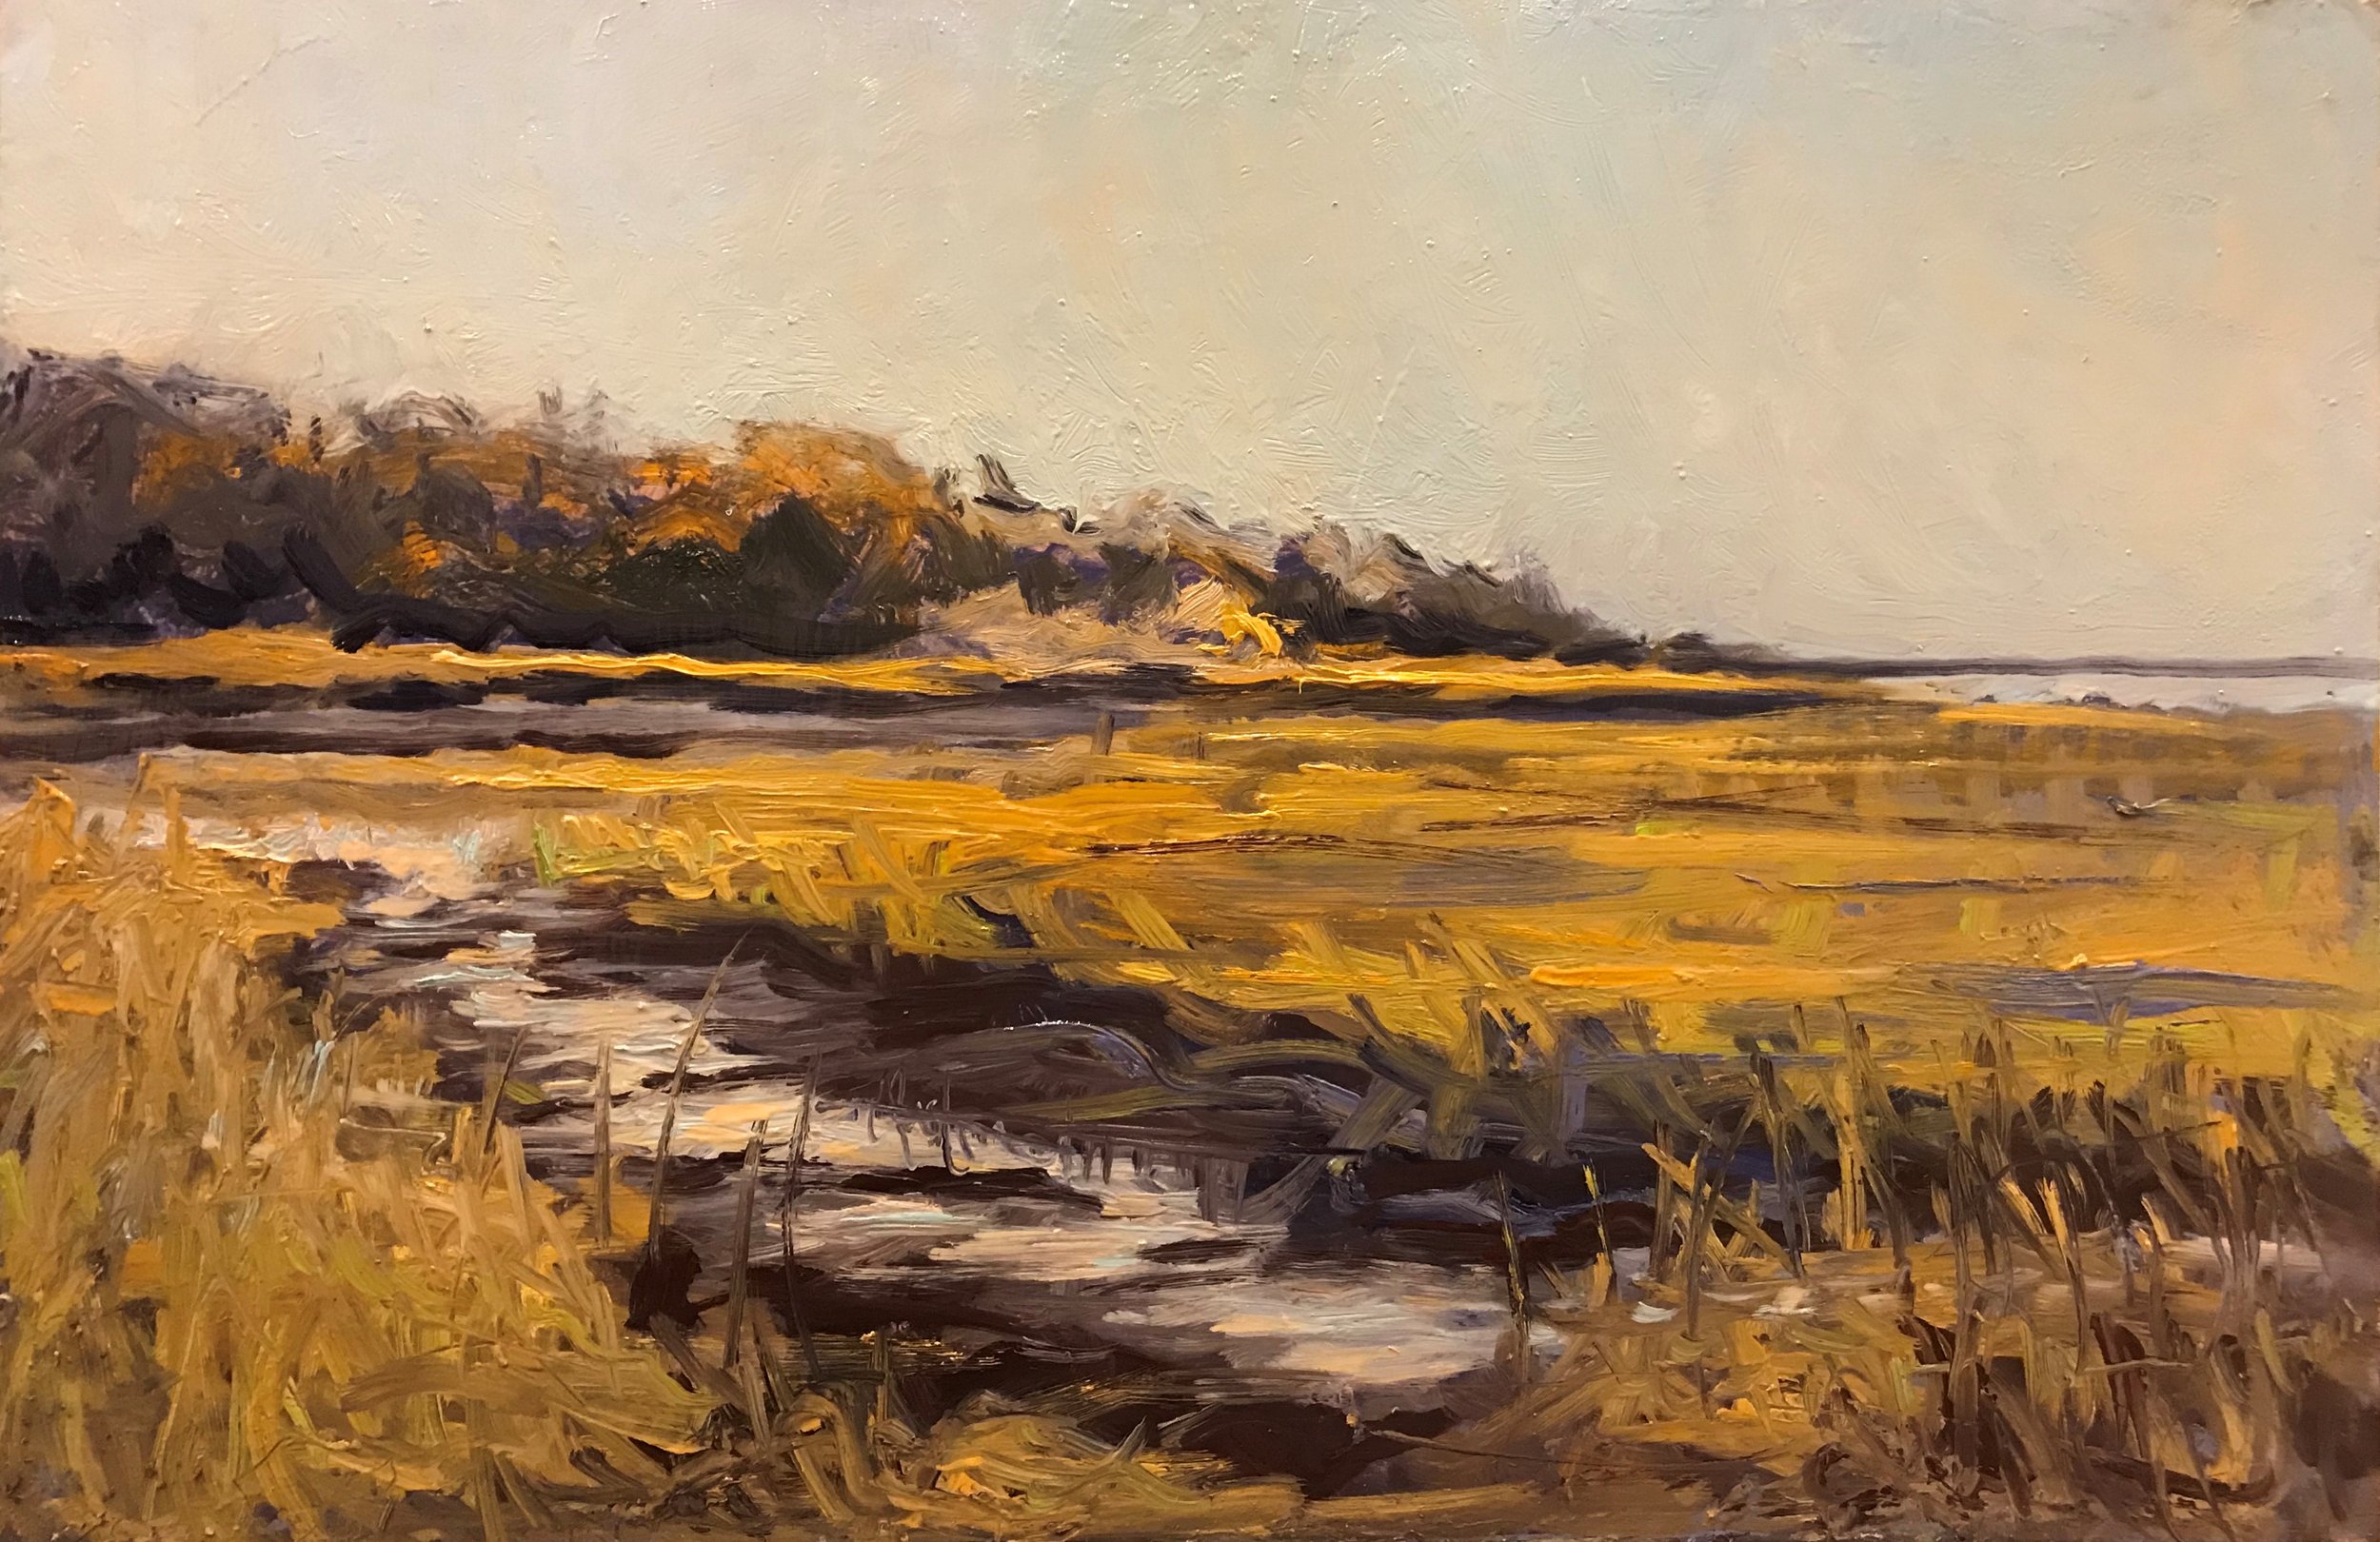 20-11-14  Mustard March Grass Looking Toward Pixie from the other side of the Dyke  Oil on Panel   12 x 18 inches.jpg